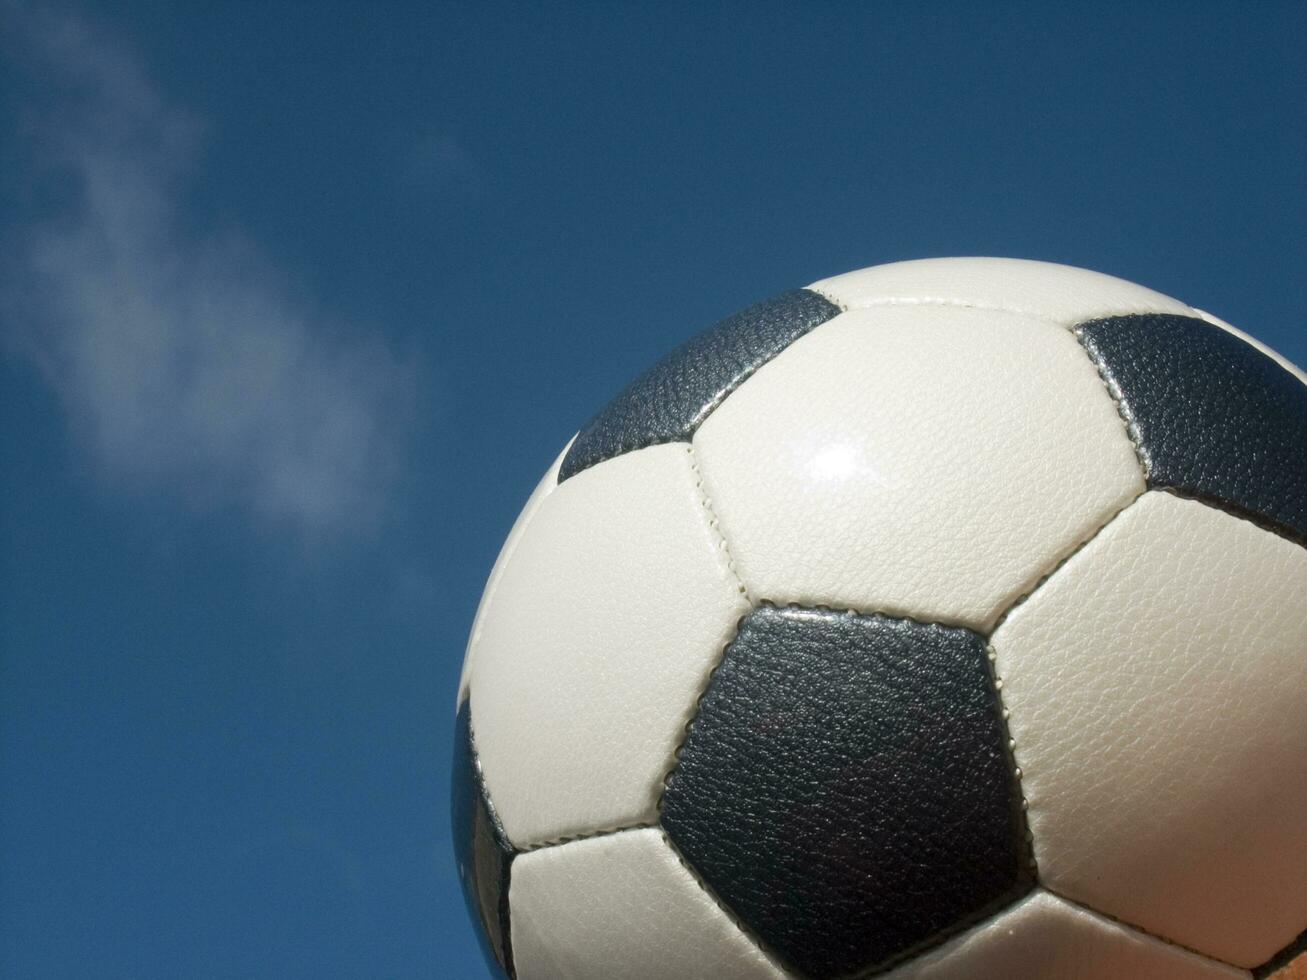 a close up of a soccer ball with leather photo